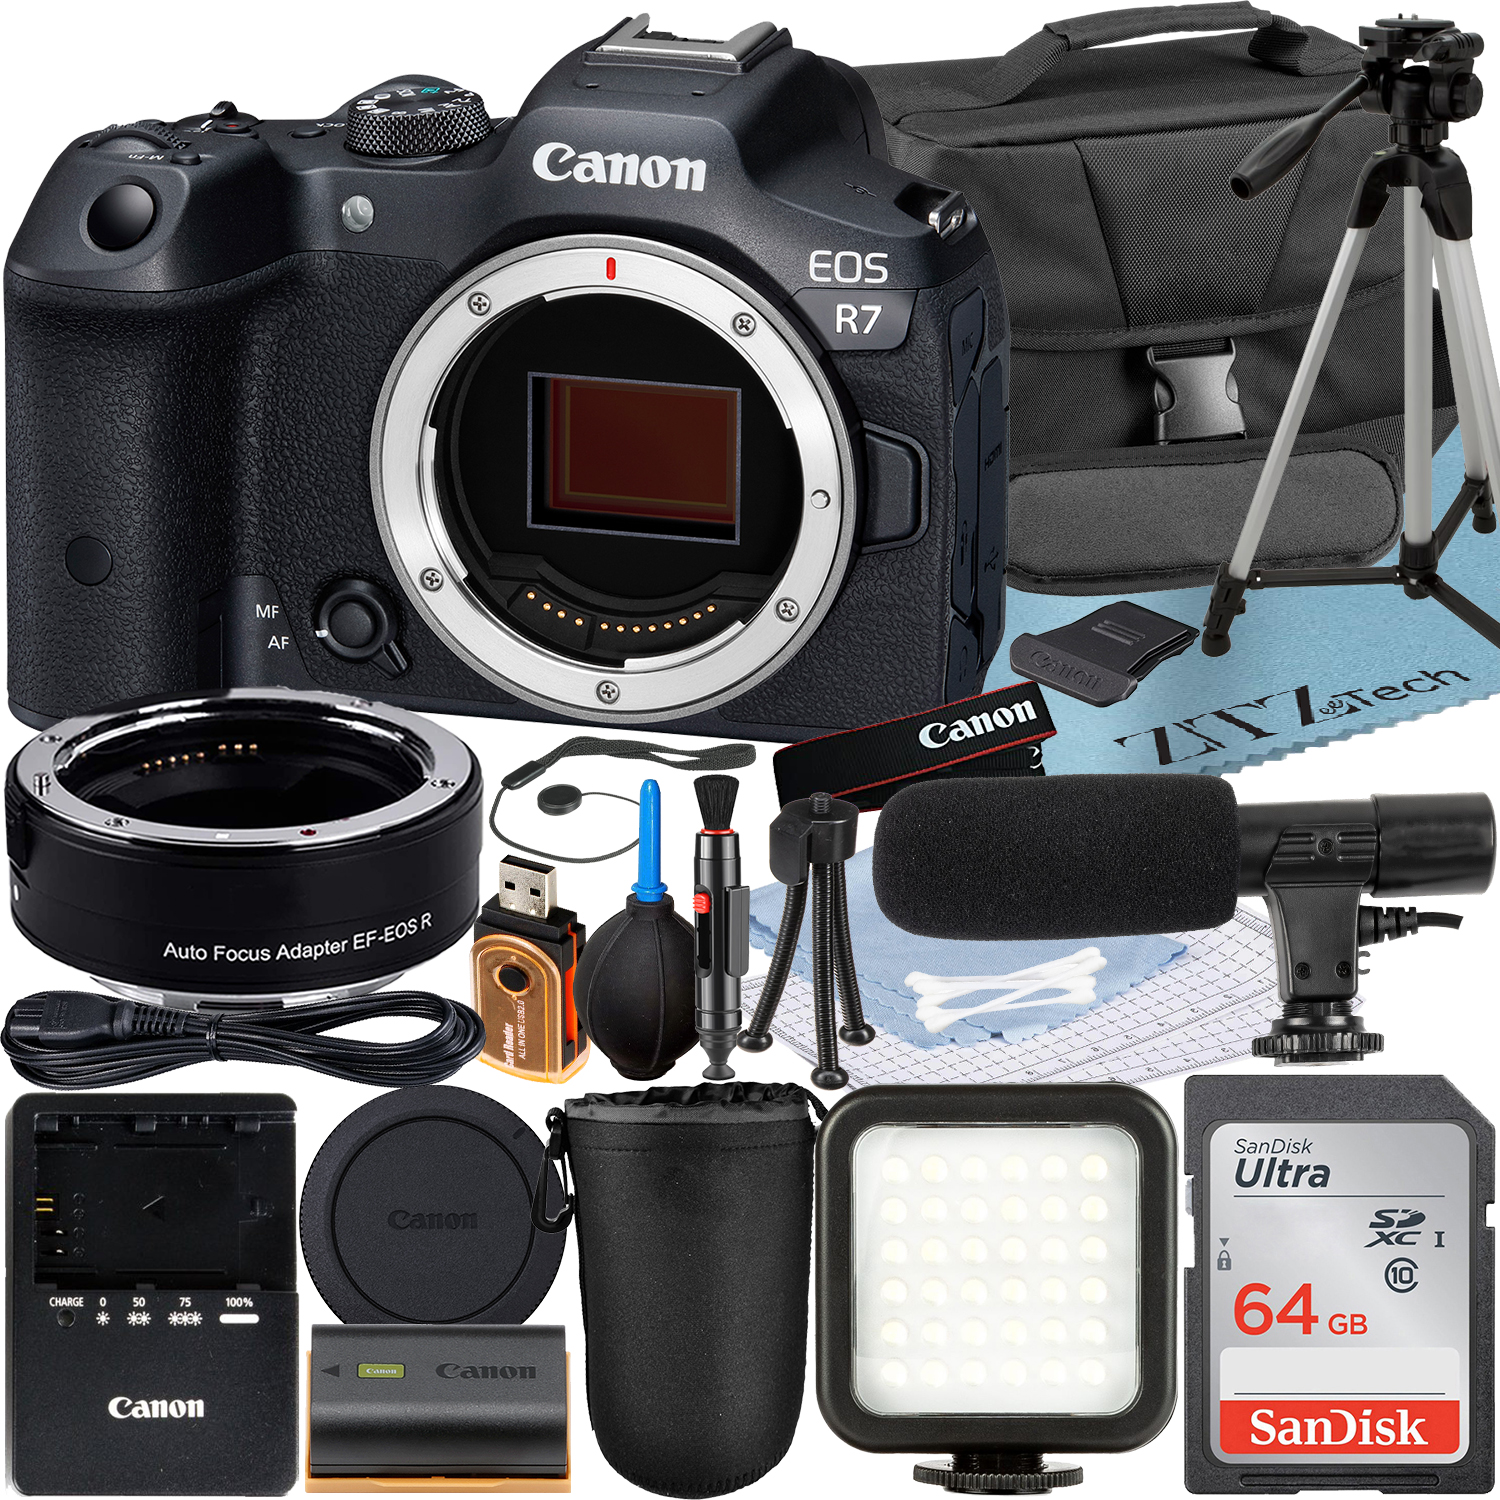 Canon EOS R7 Mirrorless Camera (Body) with Mount Adapter + SanDisk 64GB Memory Card + Case + LED Flash + ZeeTech Accessory Bundle